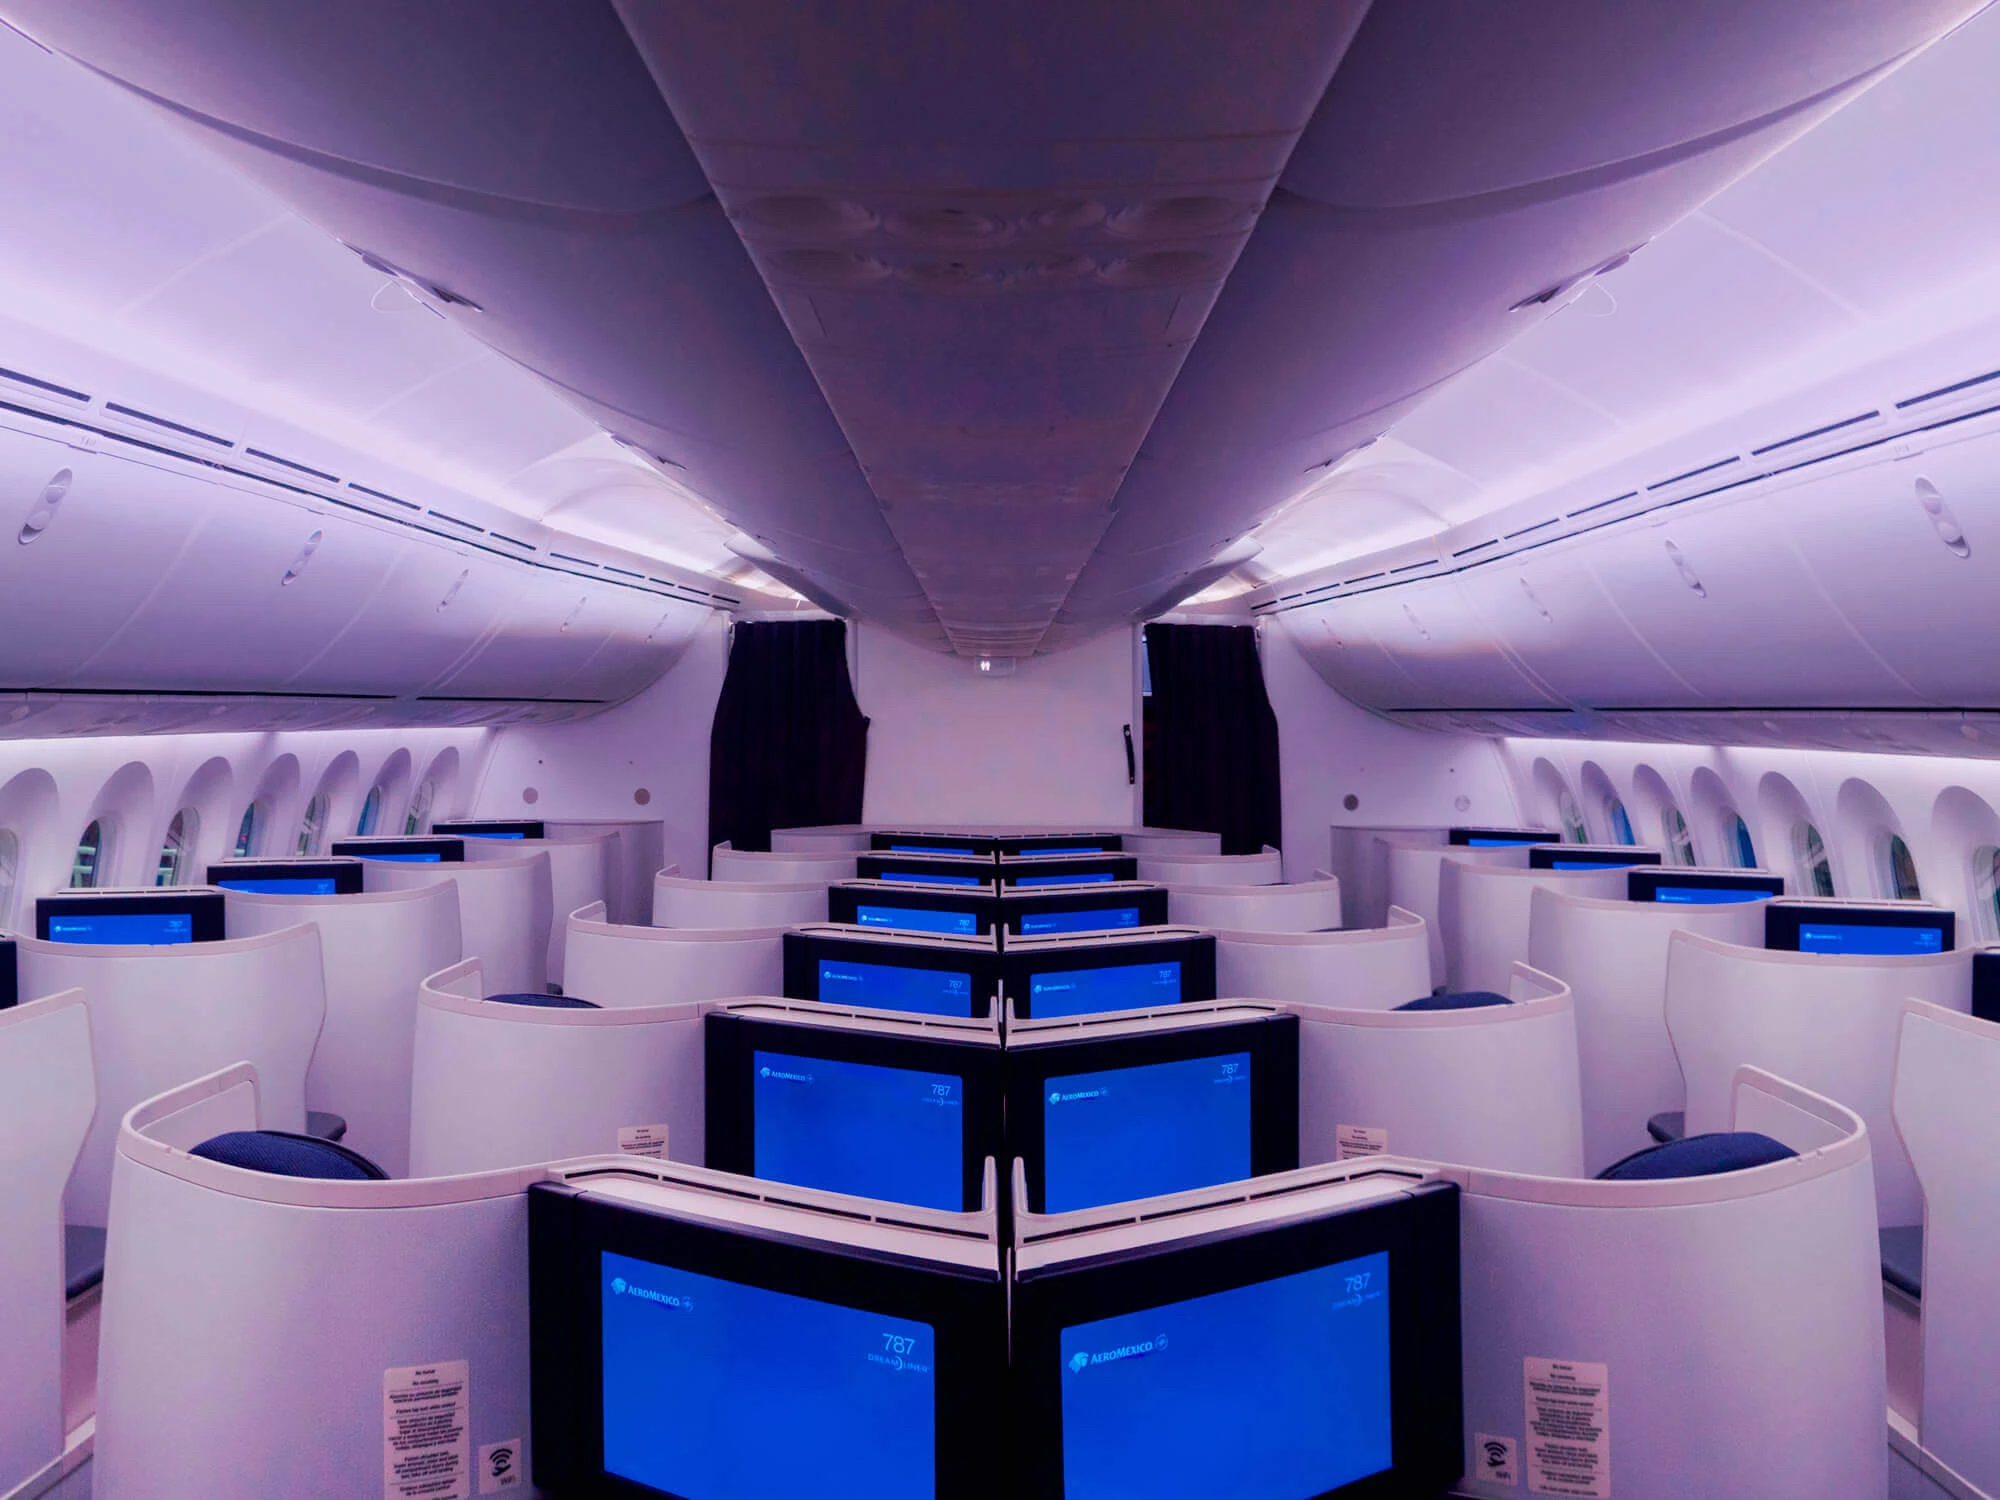 Book Aeromexico Premier Class on the 787-9 using Aeromexico Rewards Points. Find available seats with AwardFares.